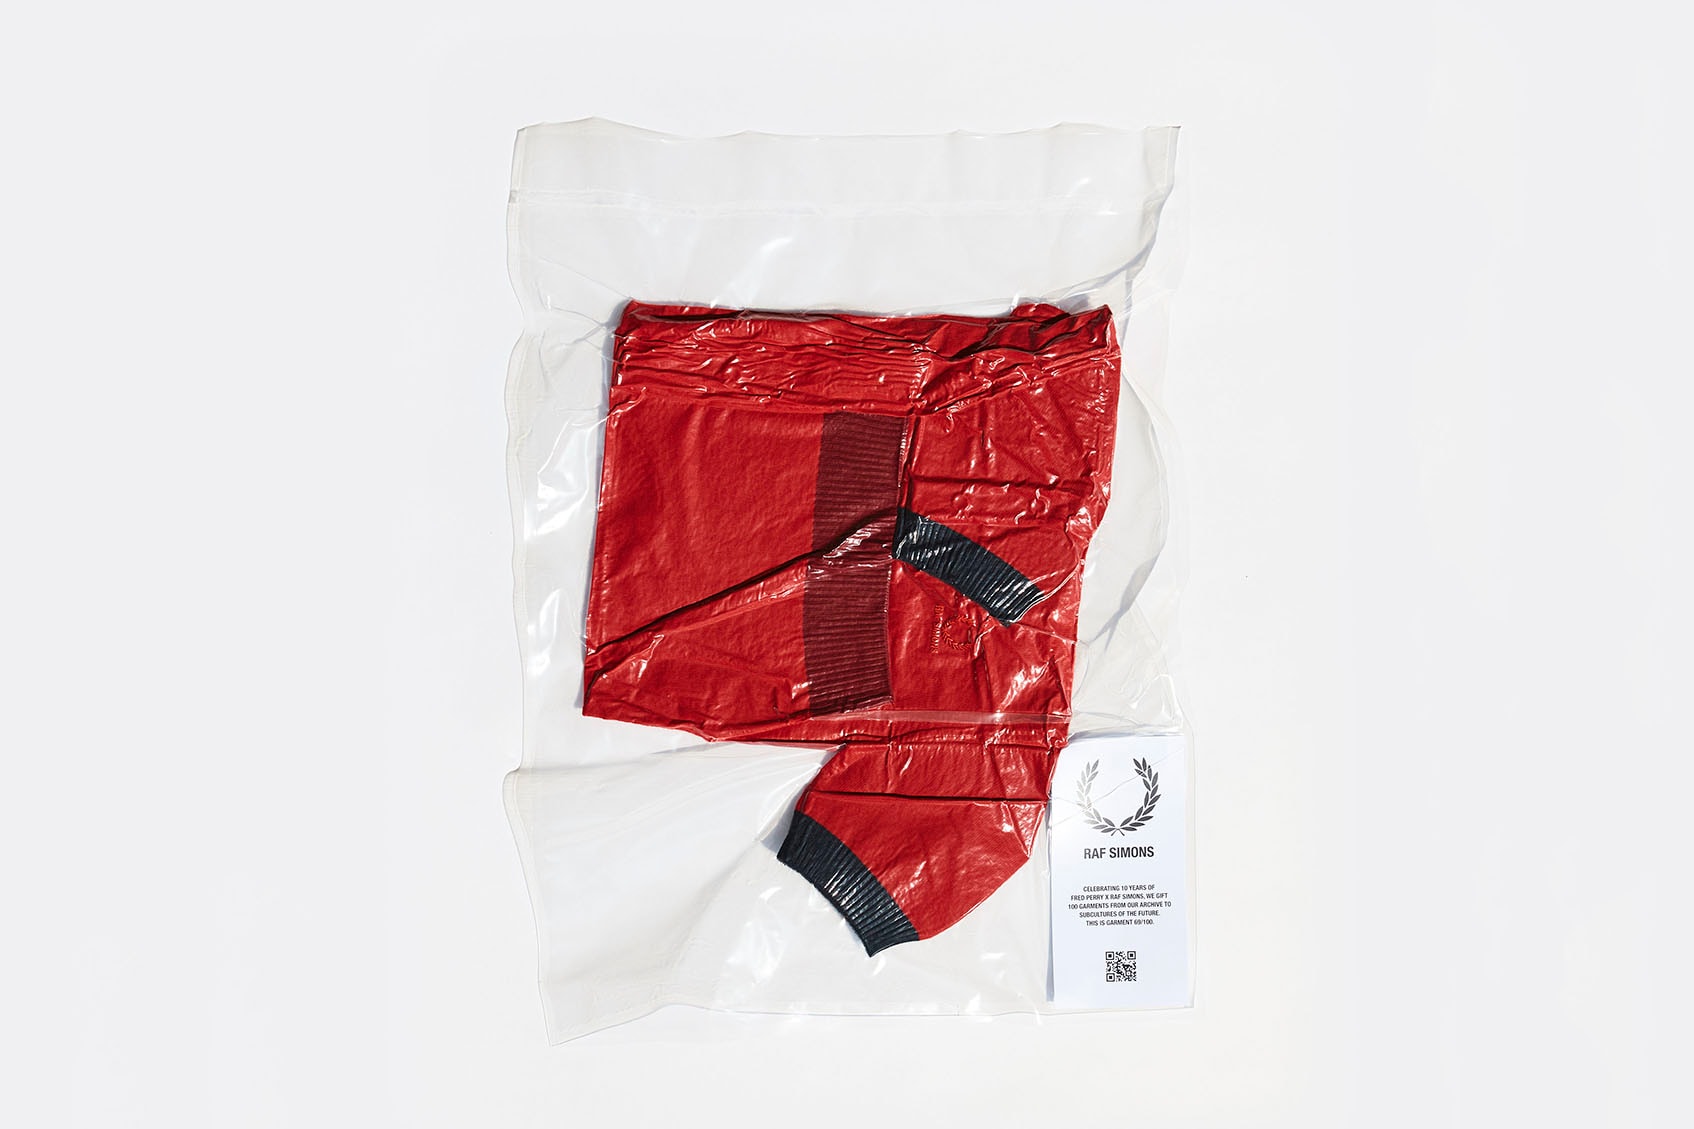 Fred Perry x Raf Simons Vacuum Sealed Garments 10 Years Athens Olya Oleinic Kyle Weeks Photography Project Subculture Youth Culture